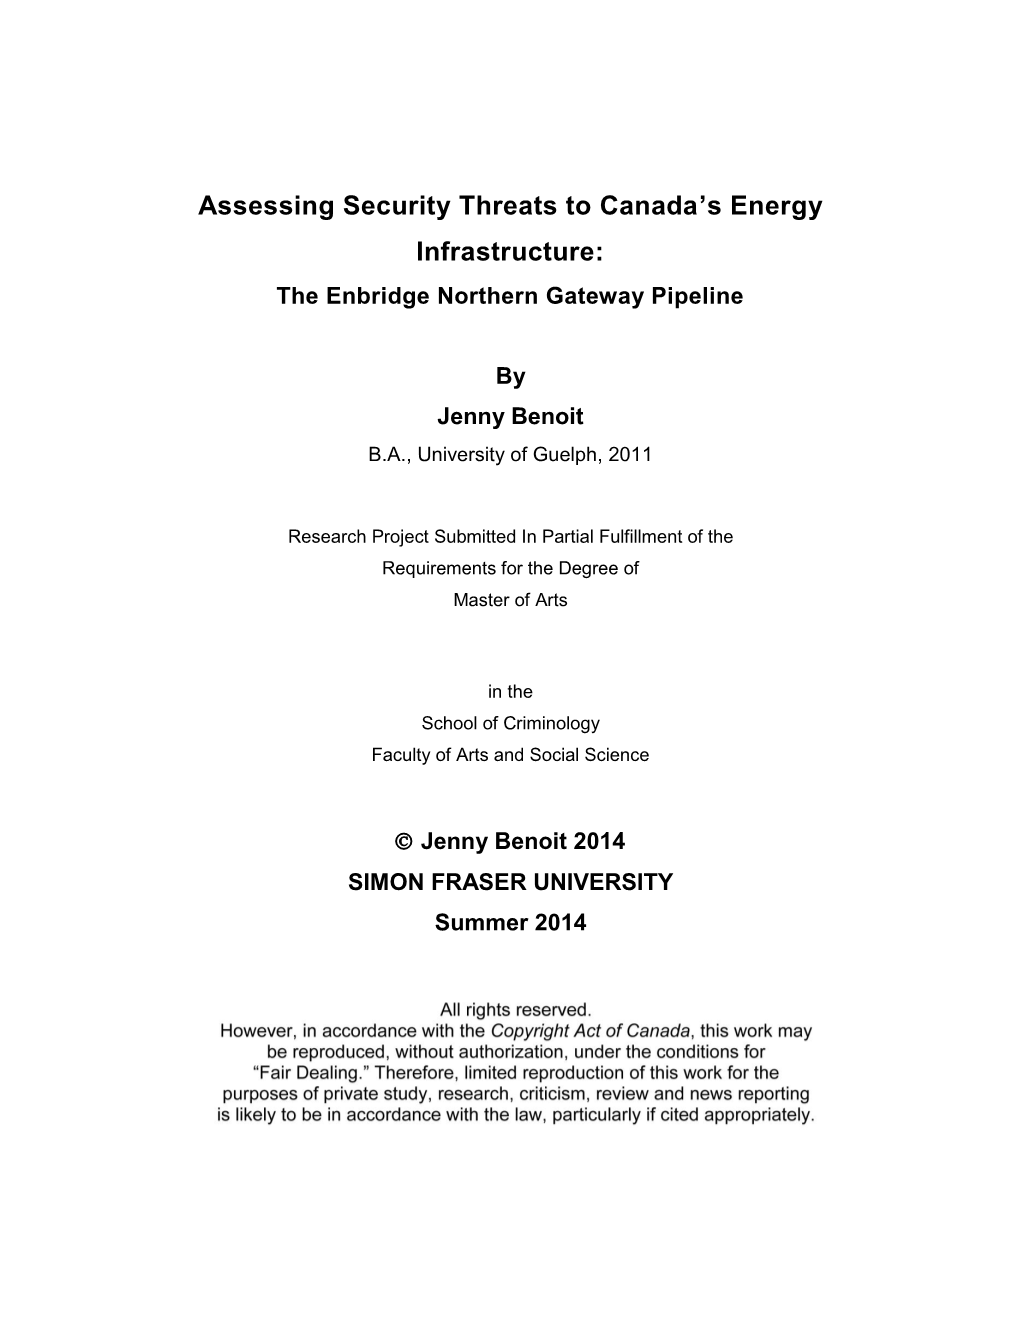 Assessing Security Threats to Canada's Energy Infrastructure